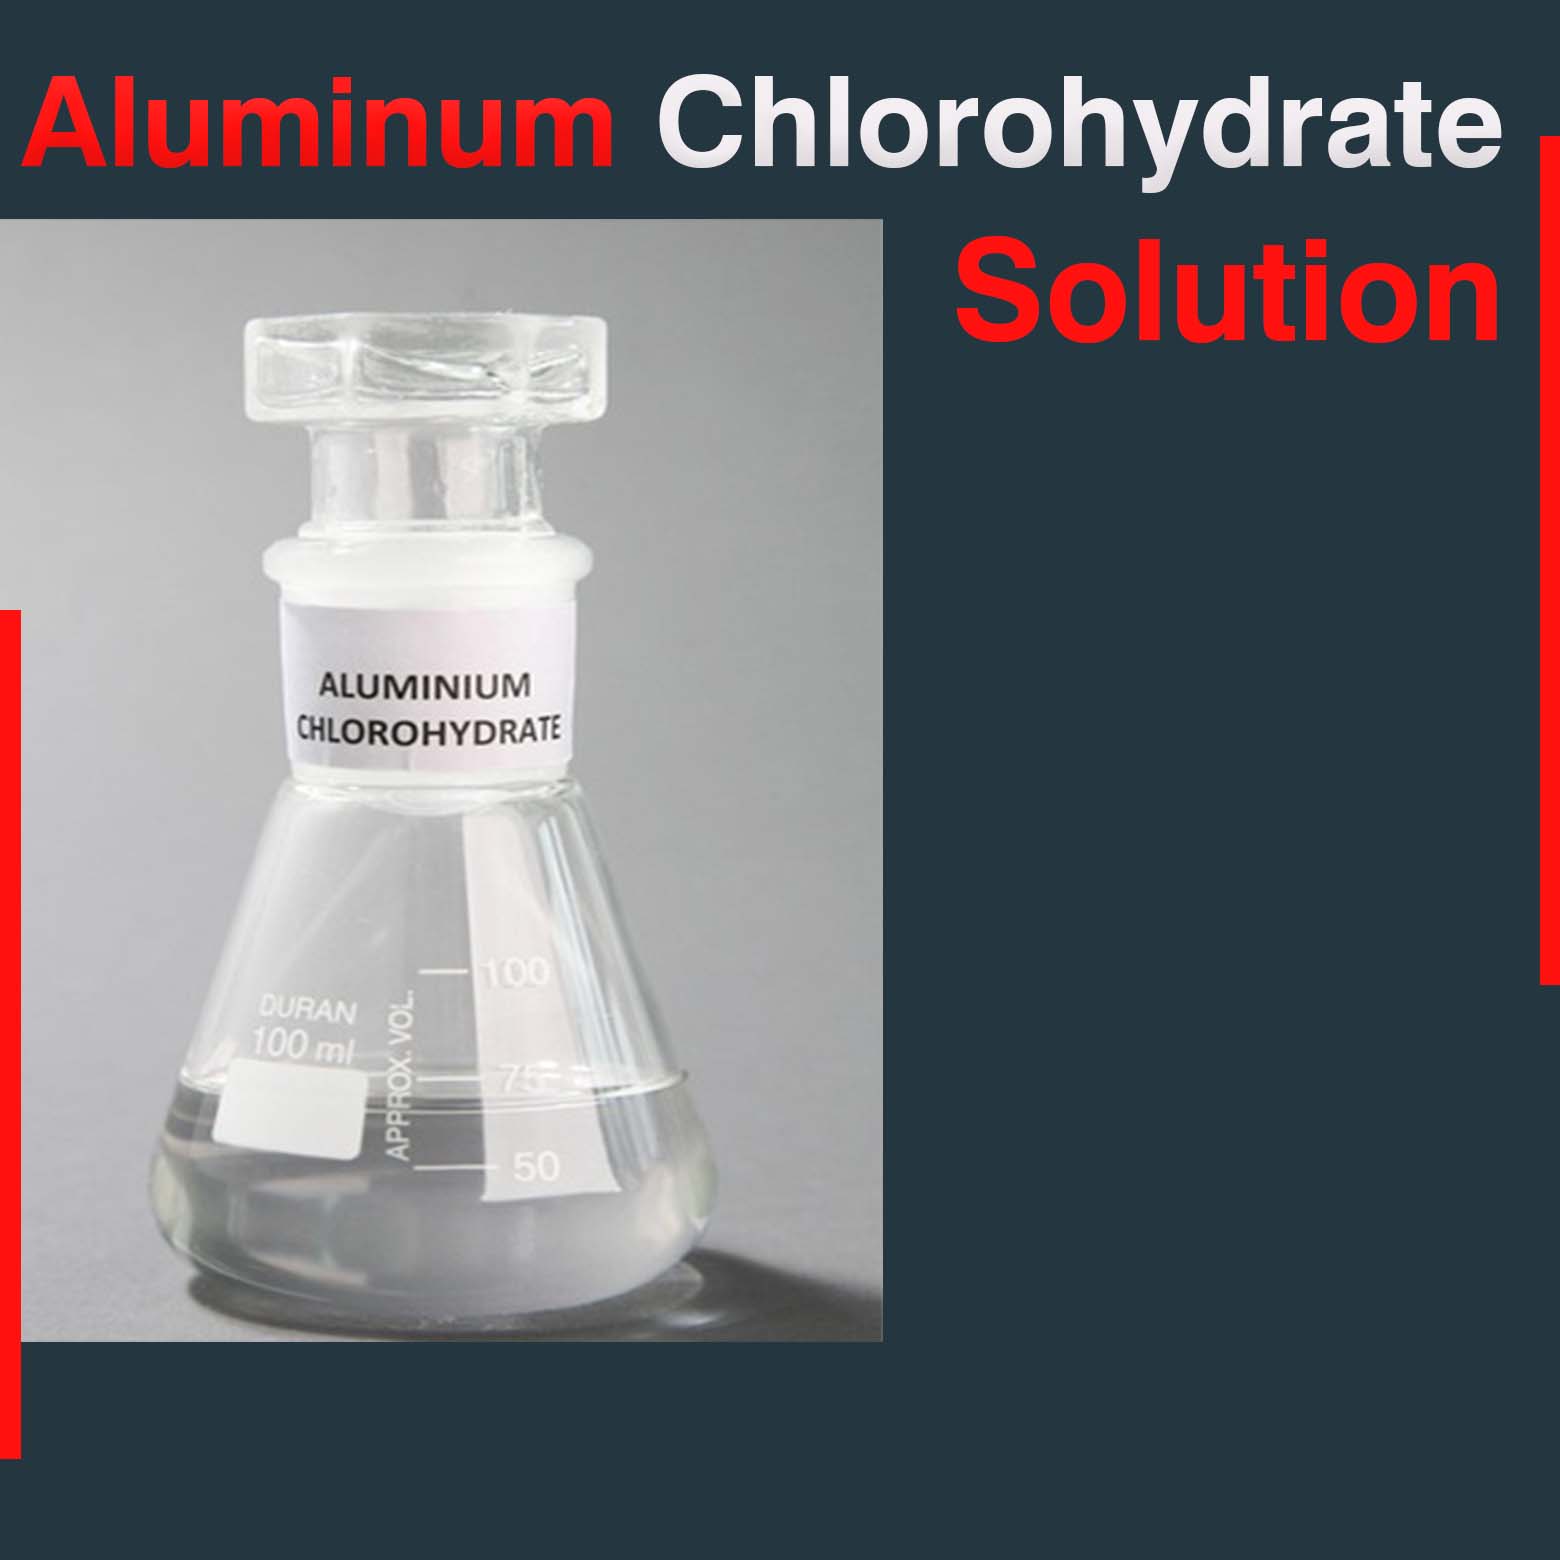 Aluminum Chlorohydrate Solution